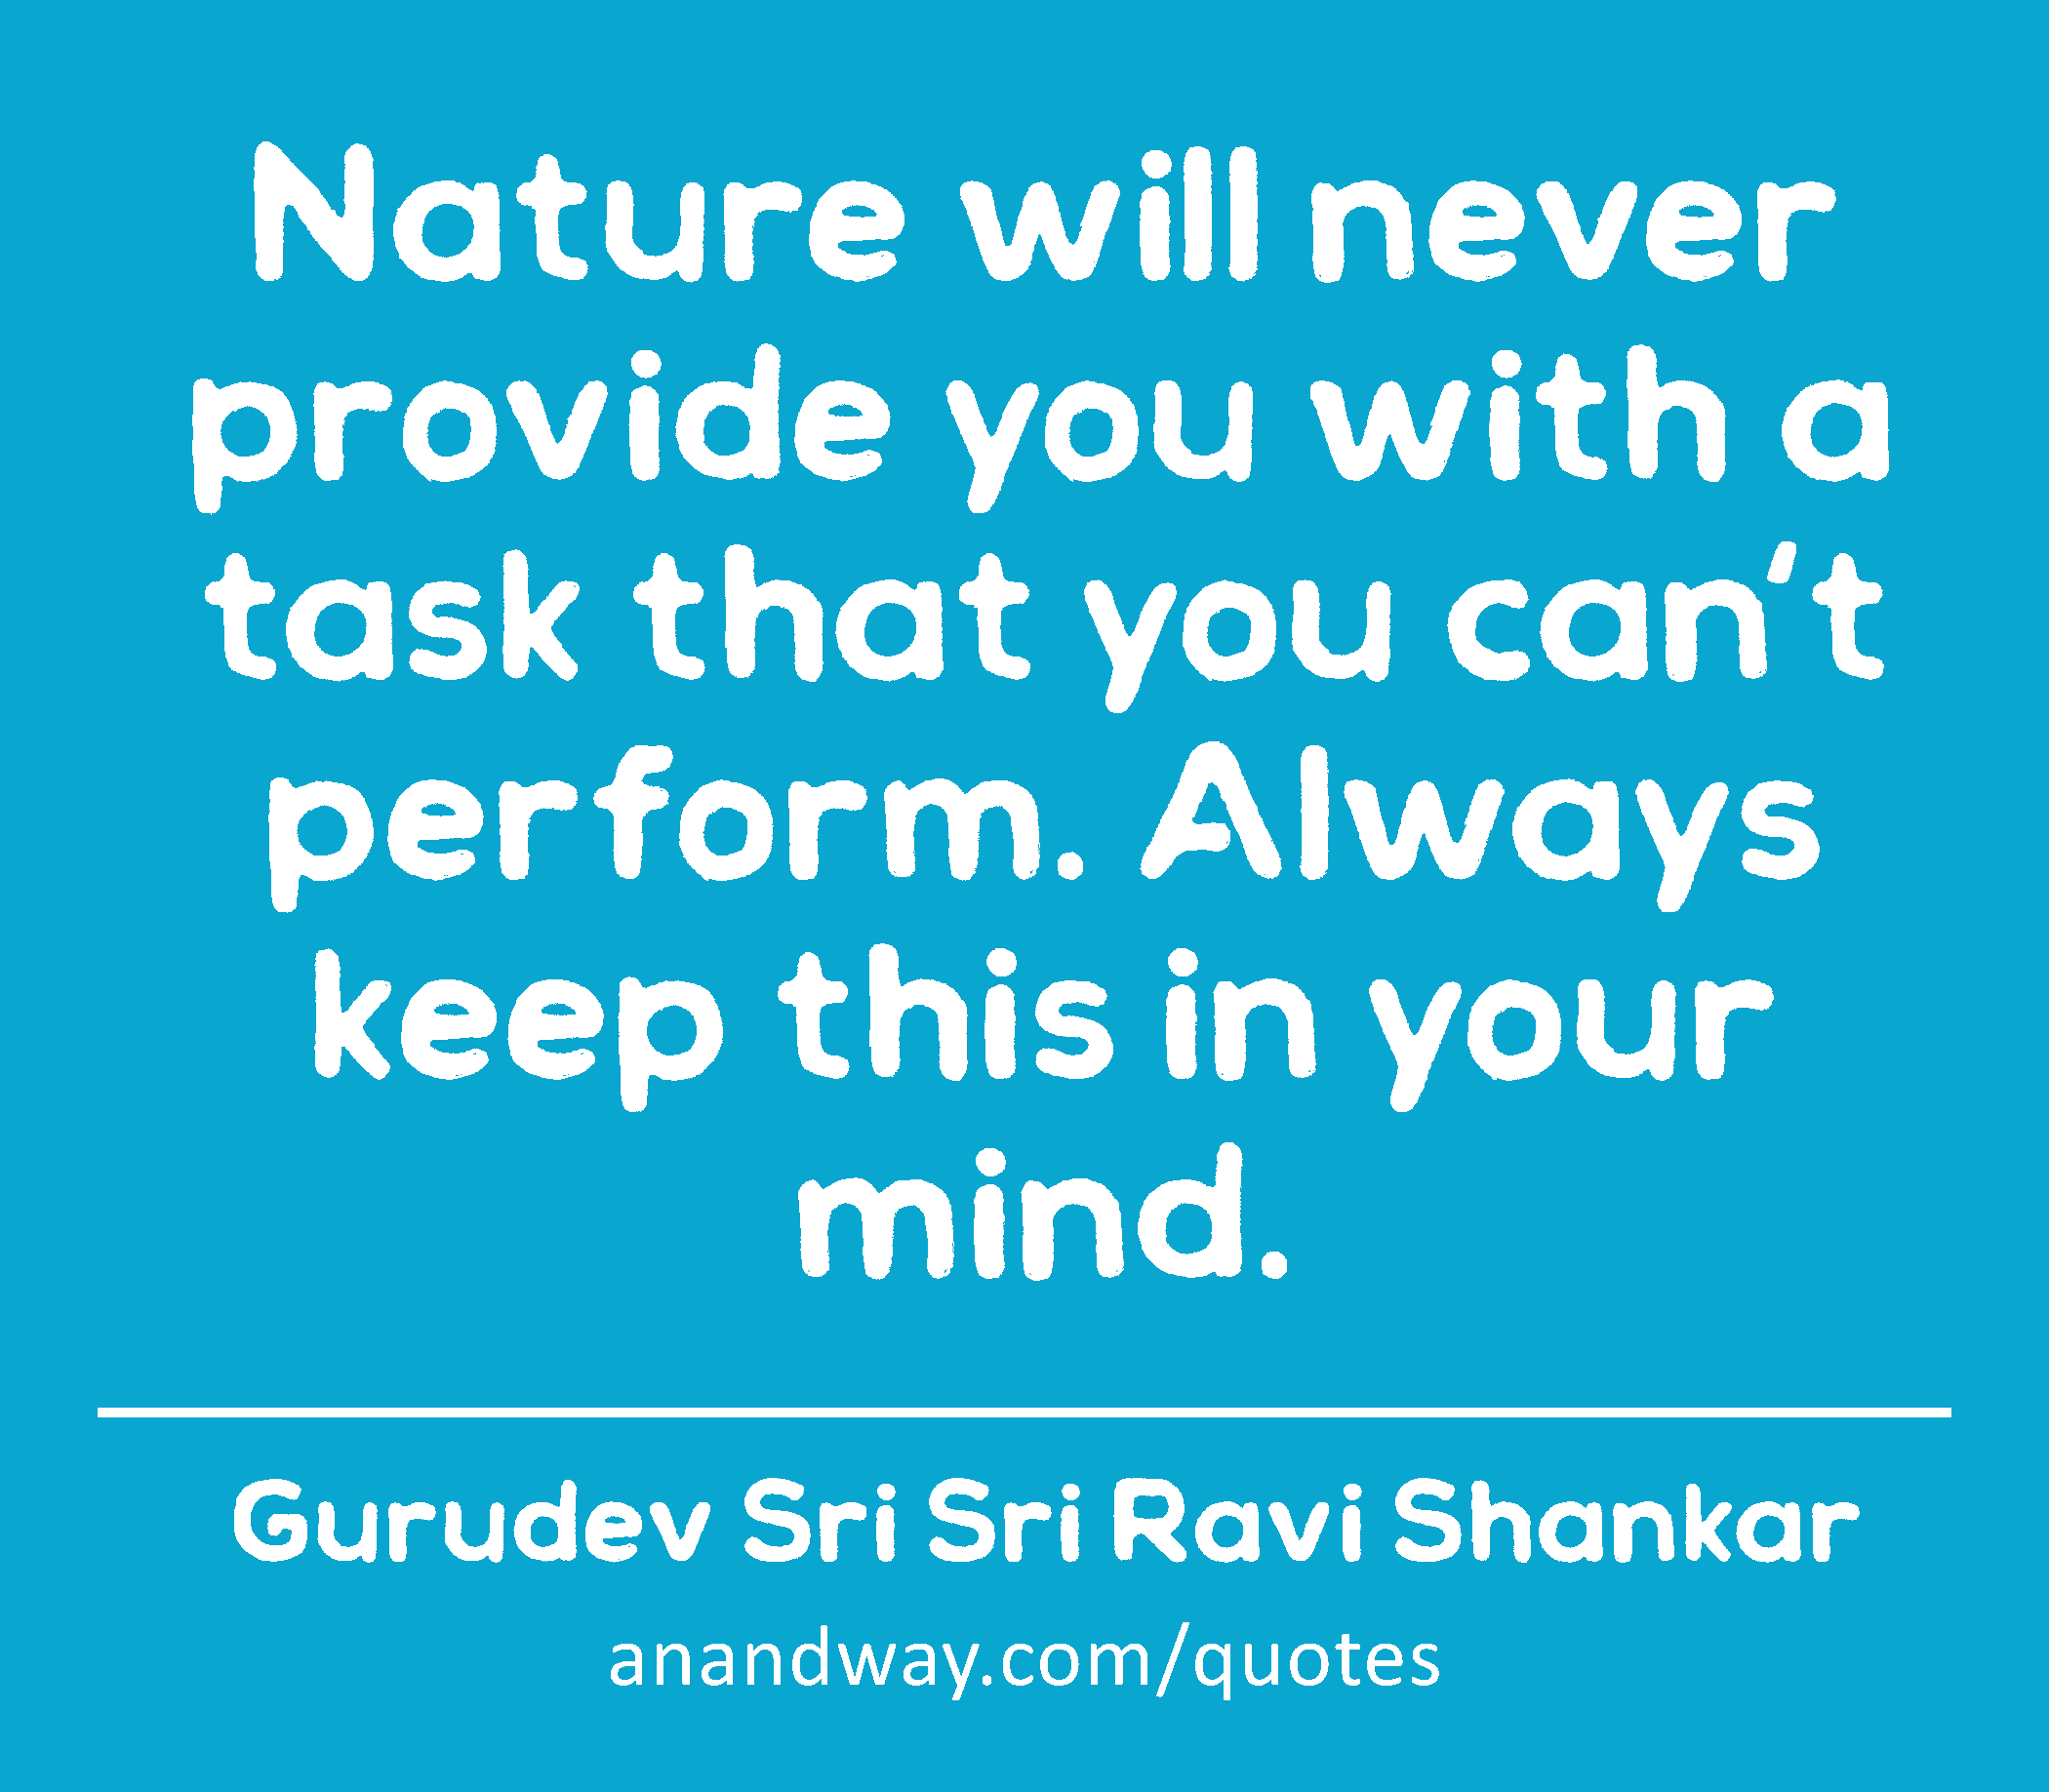 Nature will never provide you with a task that you can't perform. Always keep this in your mind. 
 -Gurudev Sri Sri Ravi Shankar